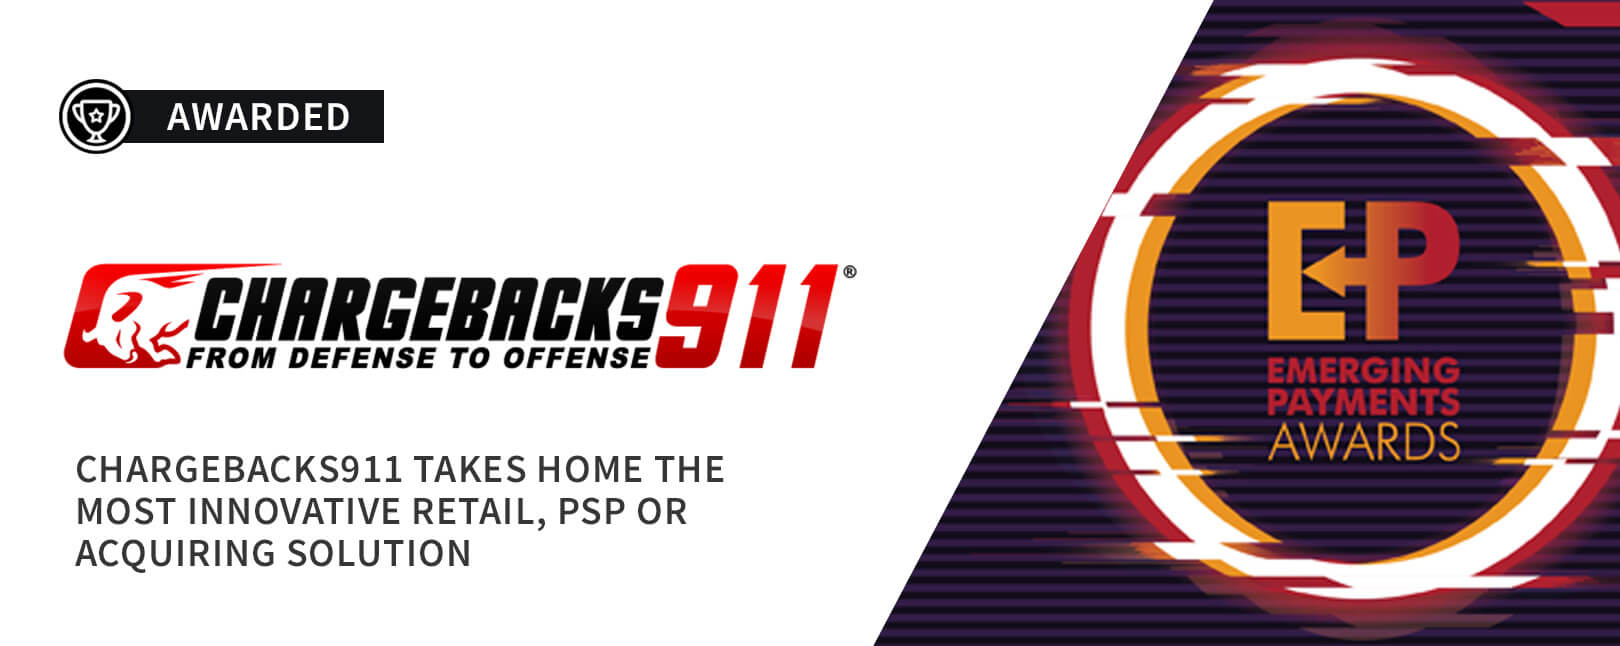 Chargebacks911® Named “Most Innovative Retail Solution”!